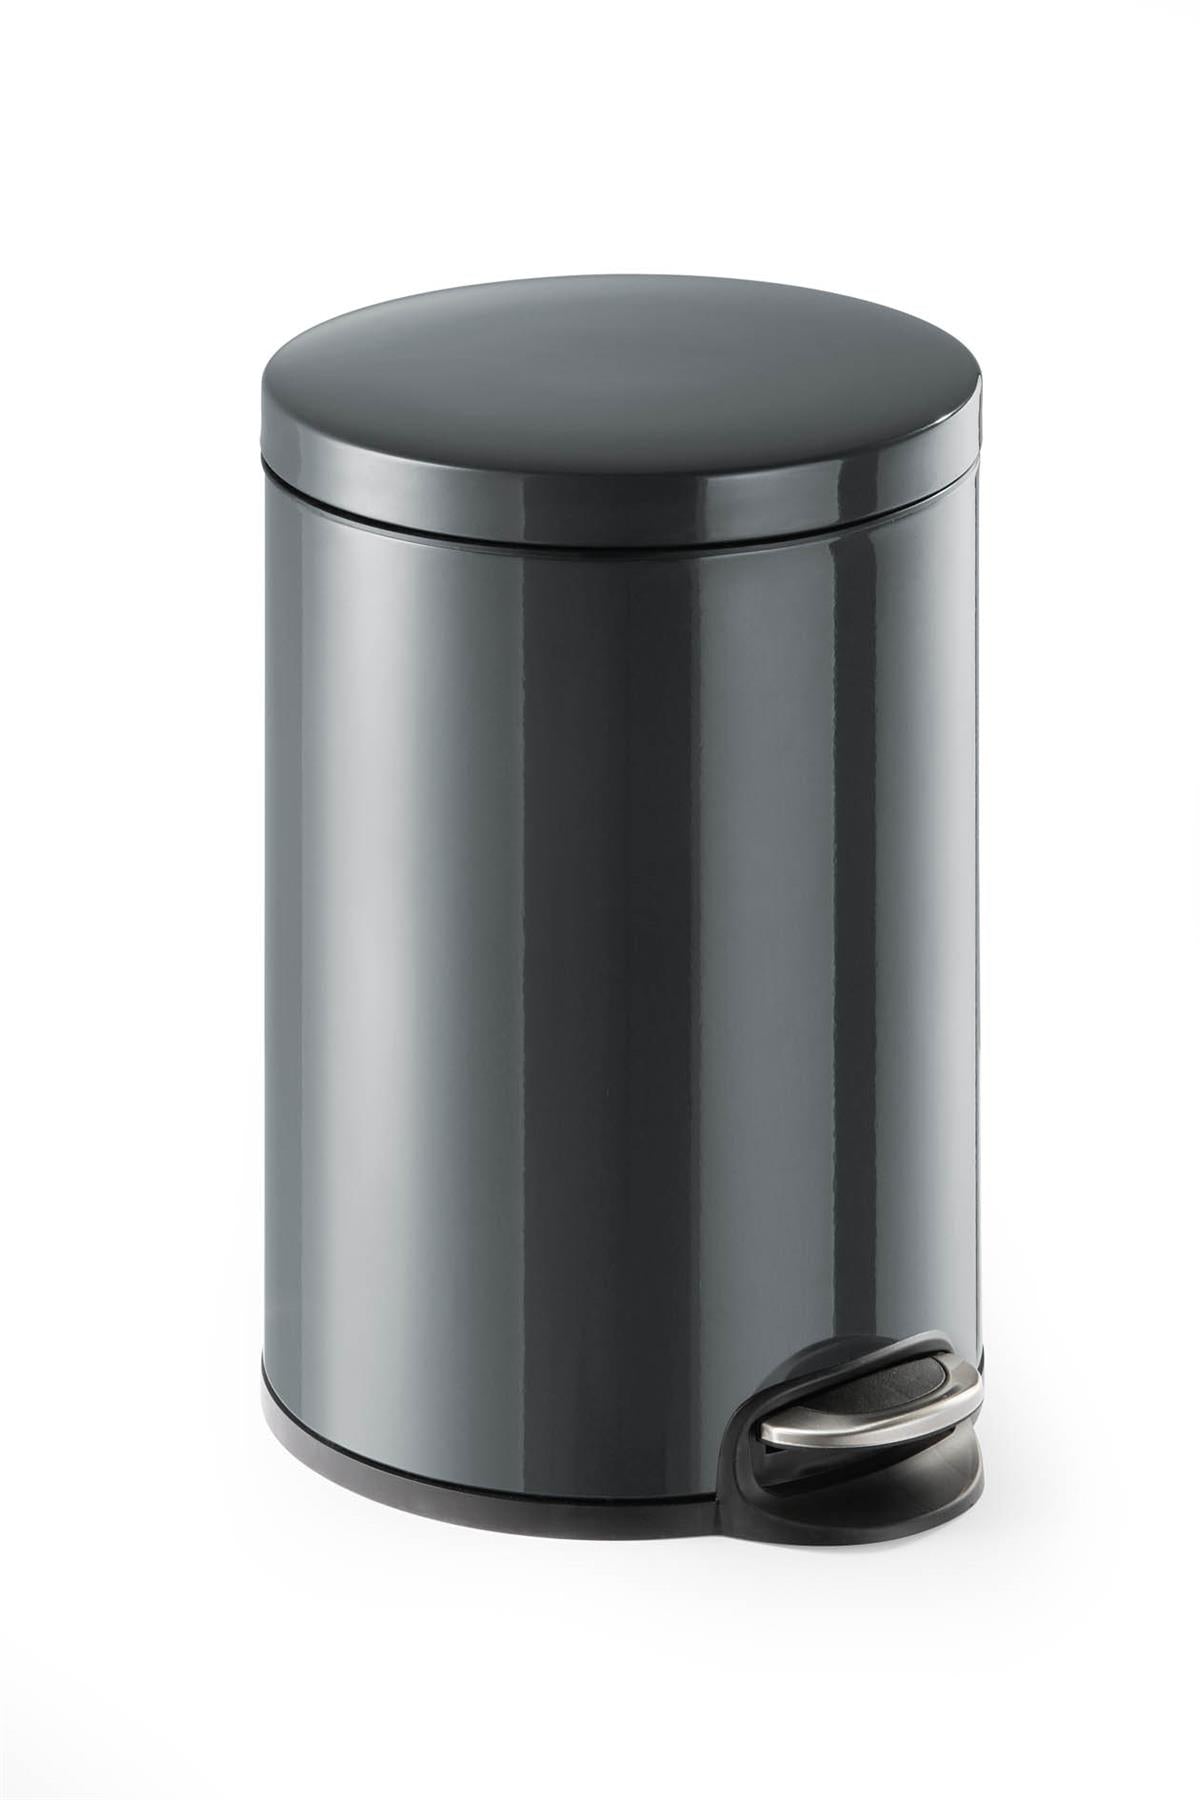 Durable Gloss Finish Round Metal Pedal Bin | 20 Litre | Charcoal Grey